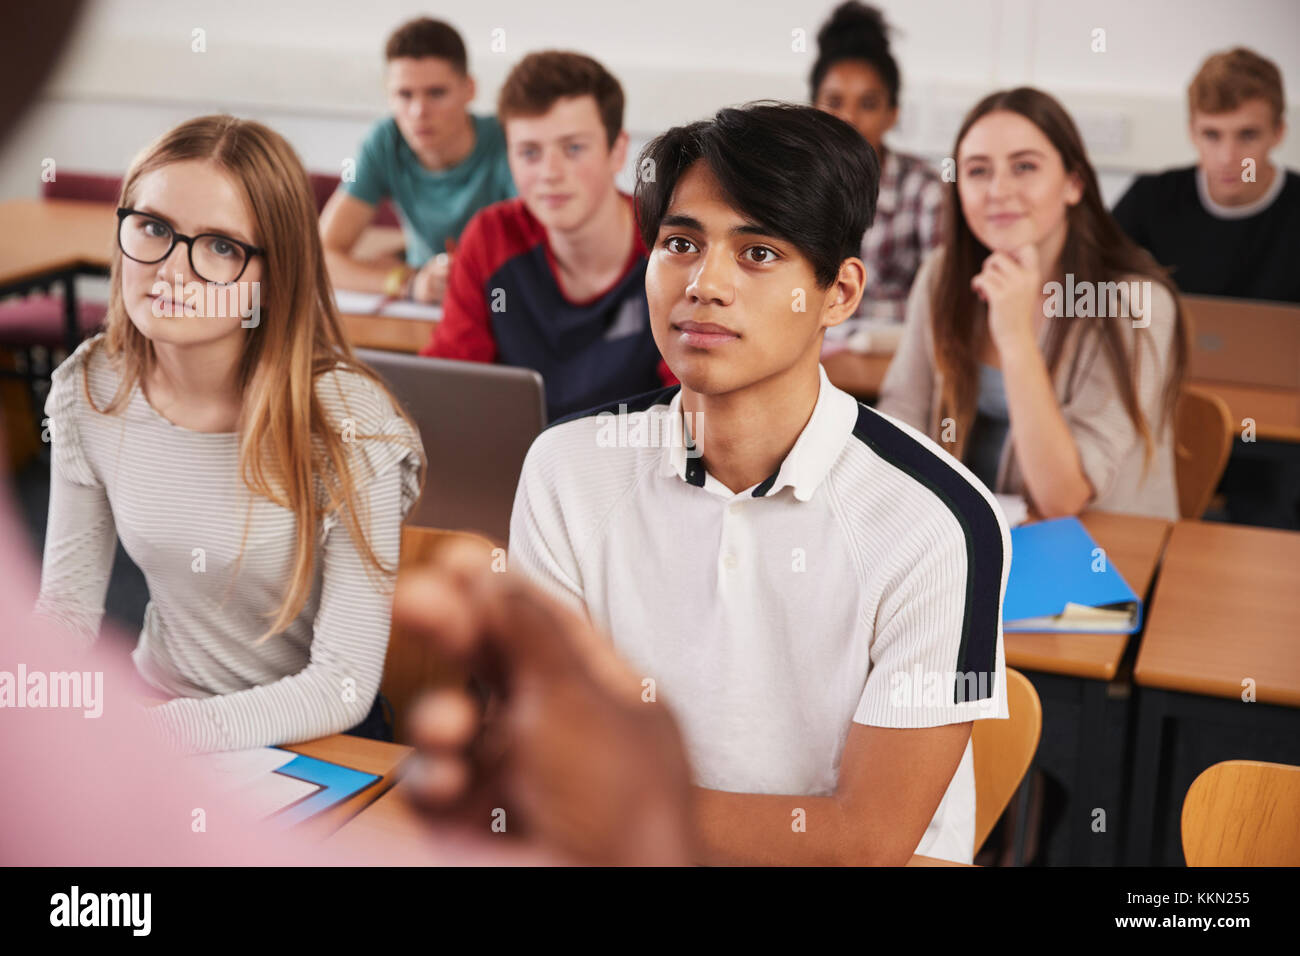 College Students In Class Viewed From Behind Teacher Stock Photo